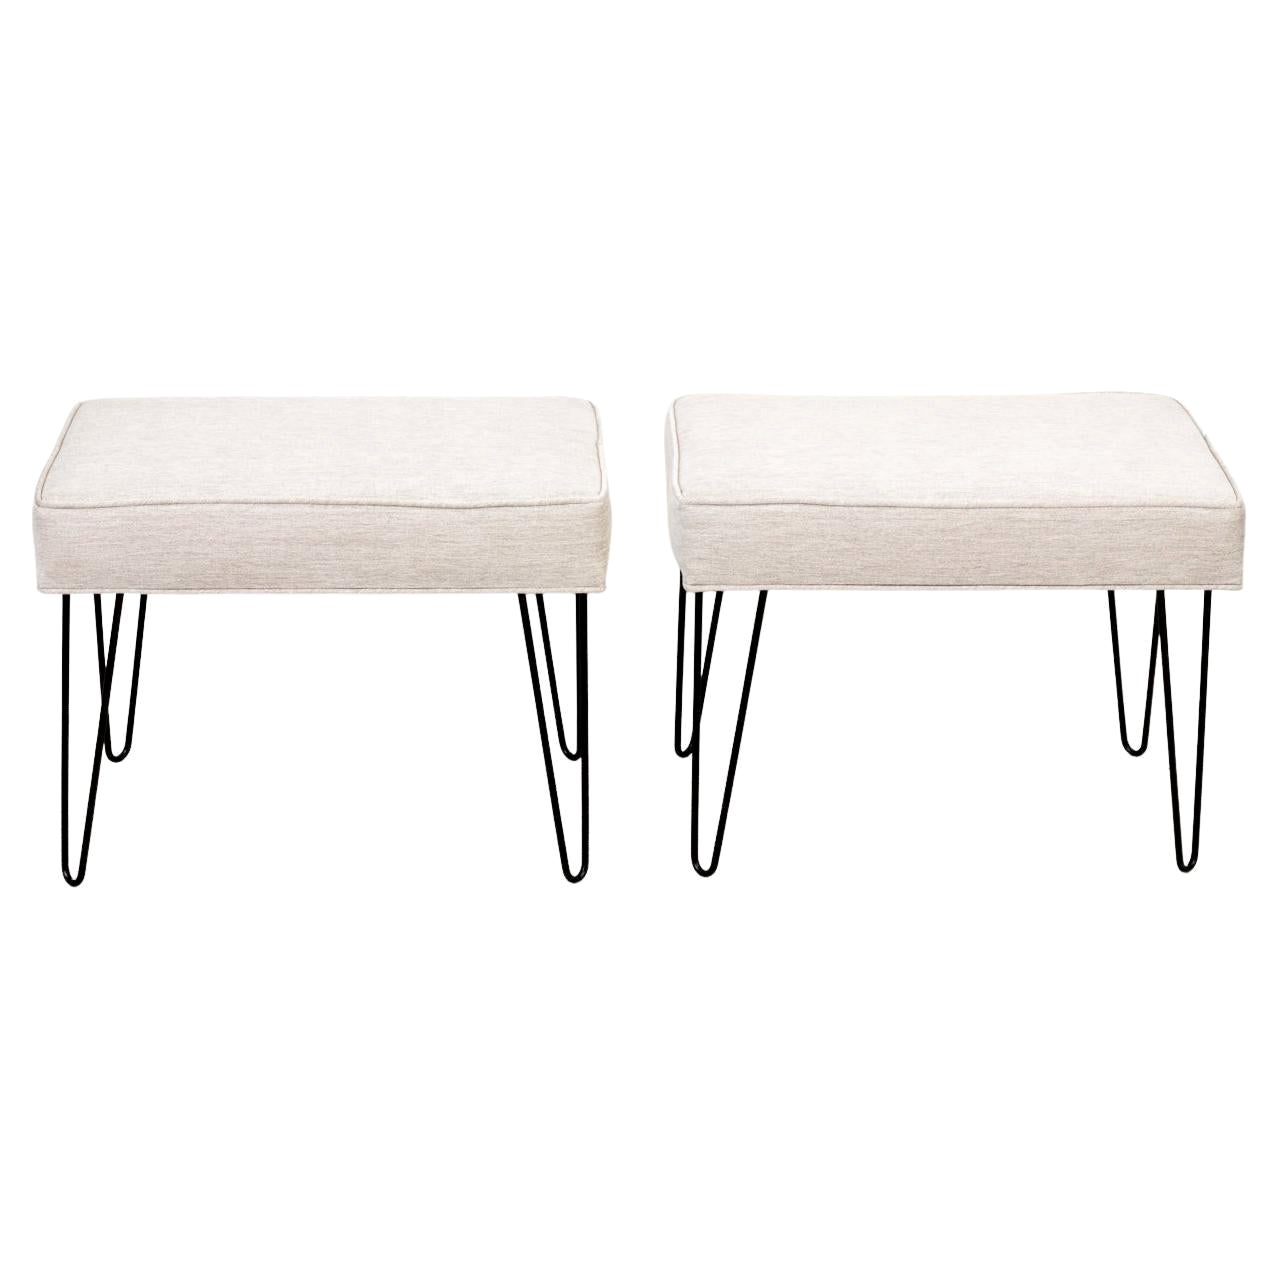 Pair of Custom Midcentury Style Hairpin Leg Benches For Sale